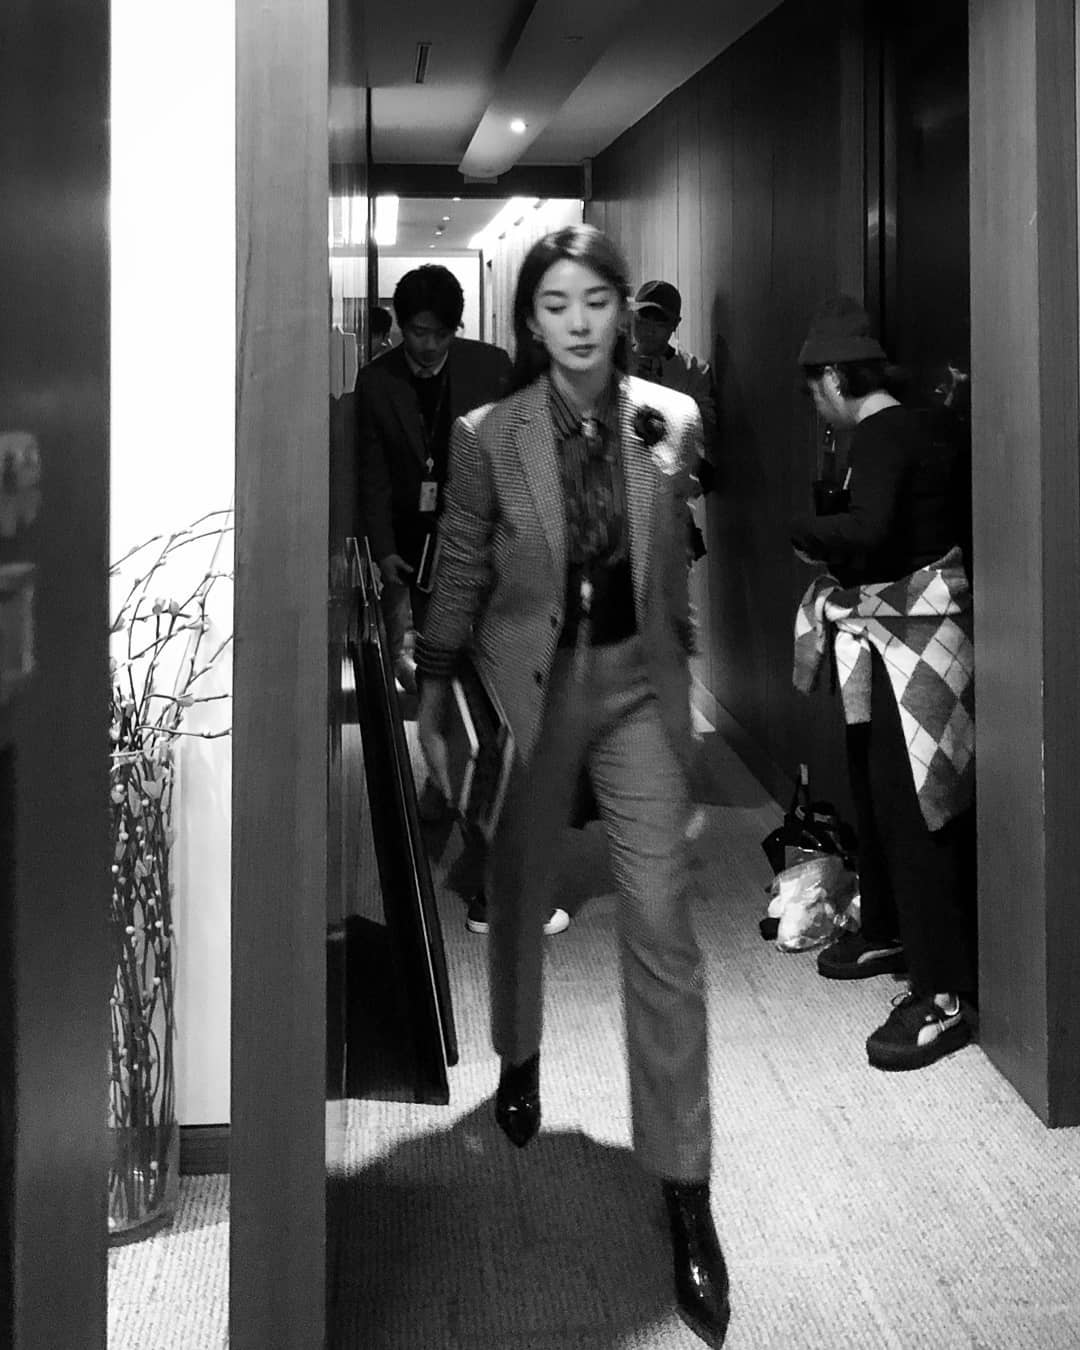 Lee Chung-ah encouraged the home shooter by sporting a nice Office look.Actor Lee Chung-ah posted a picture on his Instagram on the 22nd with an article entitled Office Noir # VIP # 22 at 10:00 pm SBS.The photo shows Lee Chung-ah walking out with a jacket and pants.It is a black and white photo, but the charisma that does not know somehow caught the attention of netizens.When the photos were released, netizens responded in various ways such as Force Fountain, Suit Pit Big and Carisma is full and beautiful.Meanwhile, Lee Chung-ah is appearing on SBS drama VIP.Photo: Lee Chung-ah Instagram